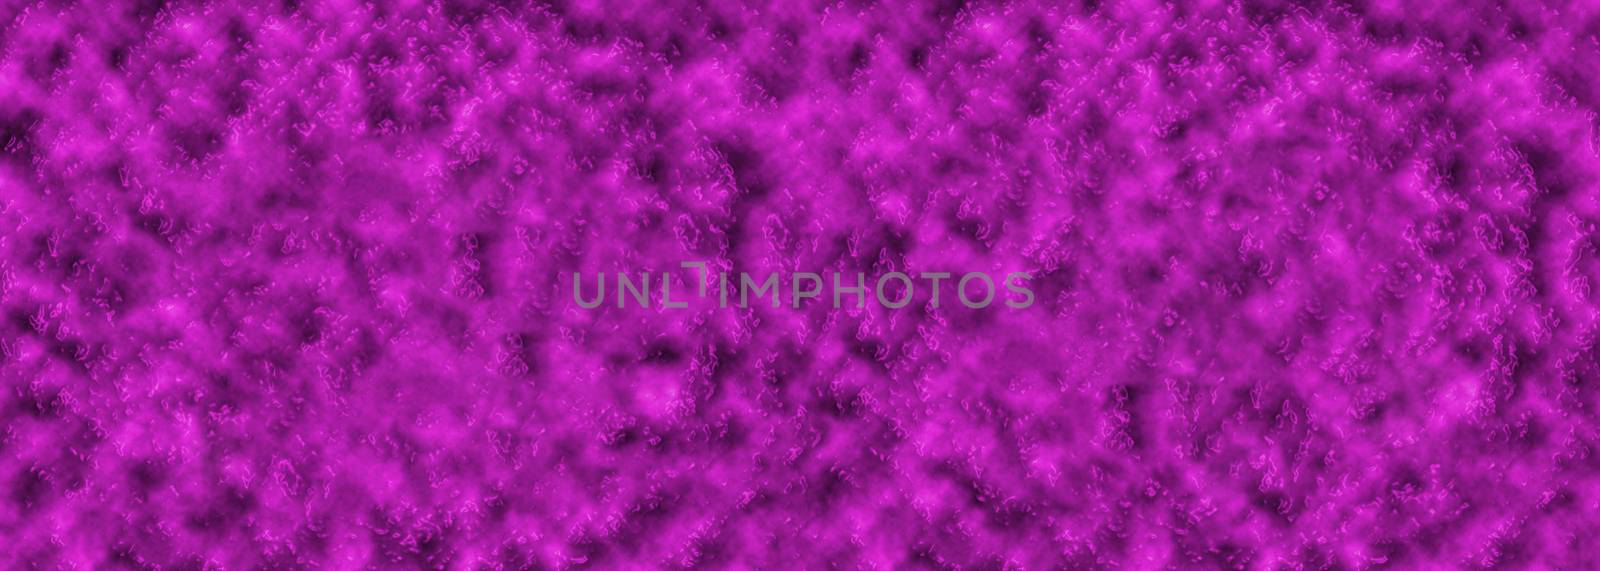 Old painted purple surface. Textured background by DamantisZ